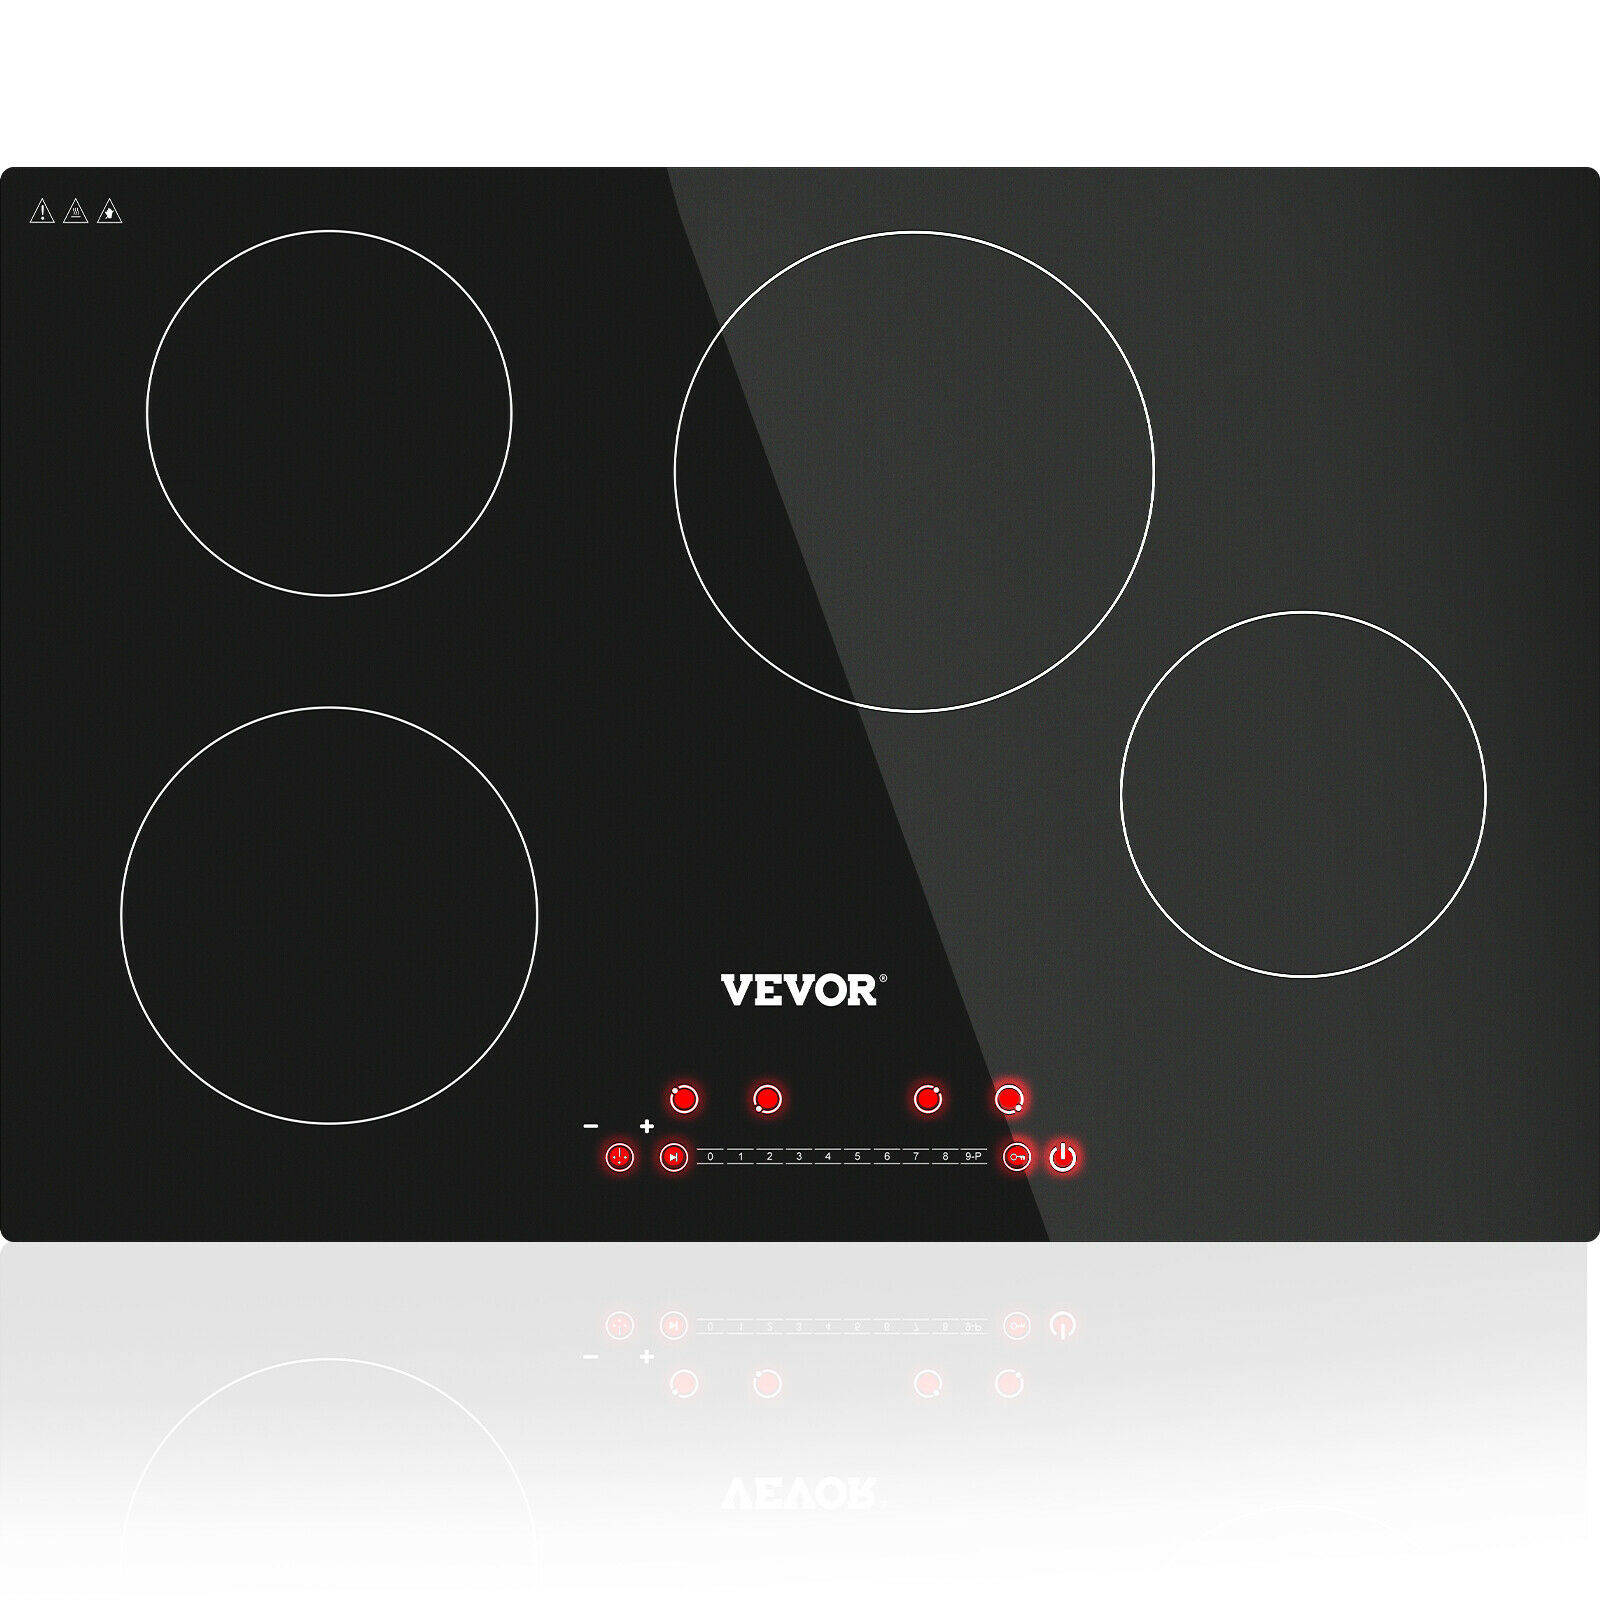 VEVOR 30x20in Induction Cooktop 4 Burner Ceramic Glass Stove Top Touch Control